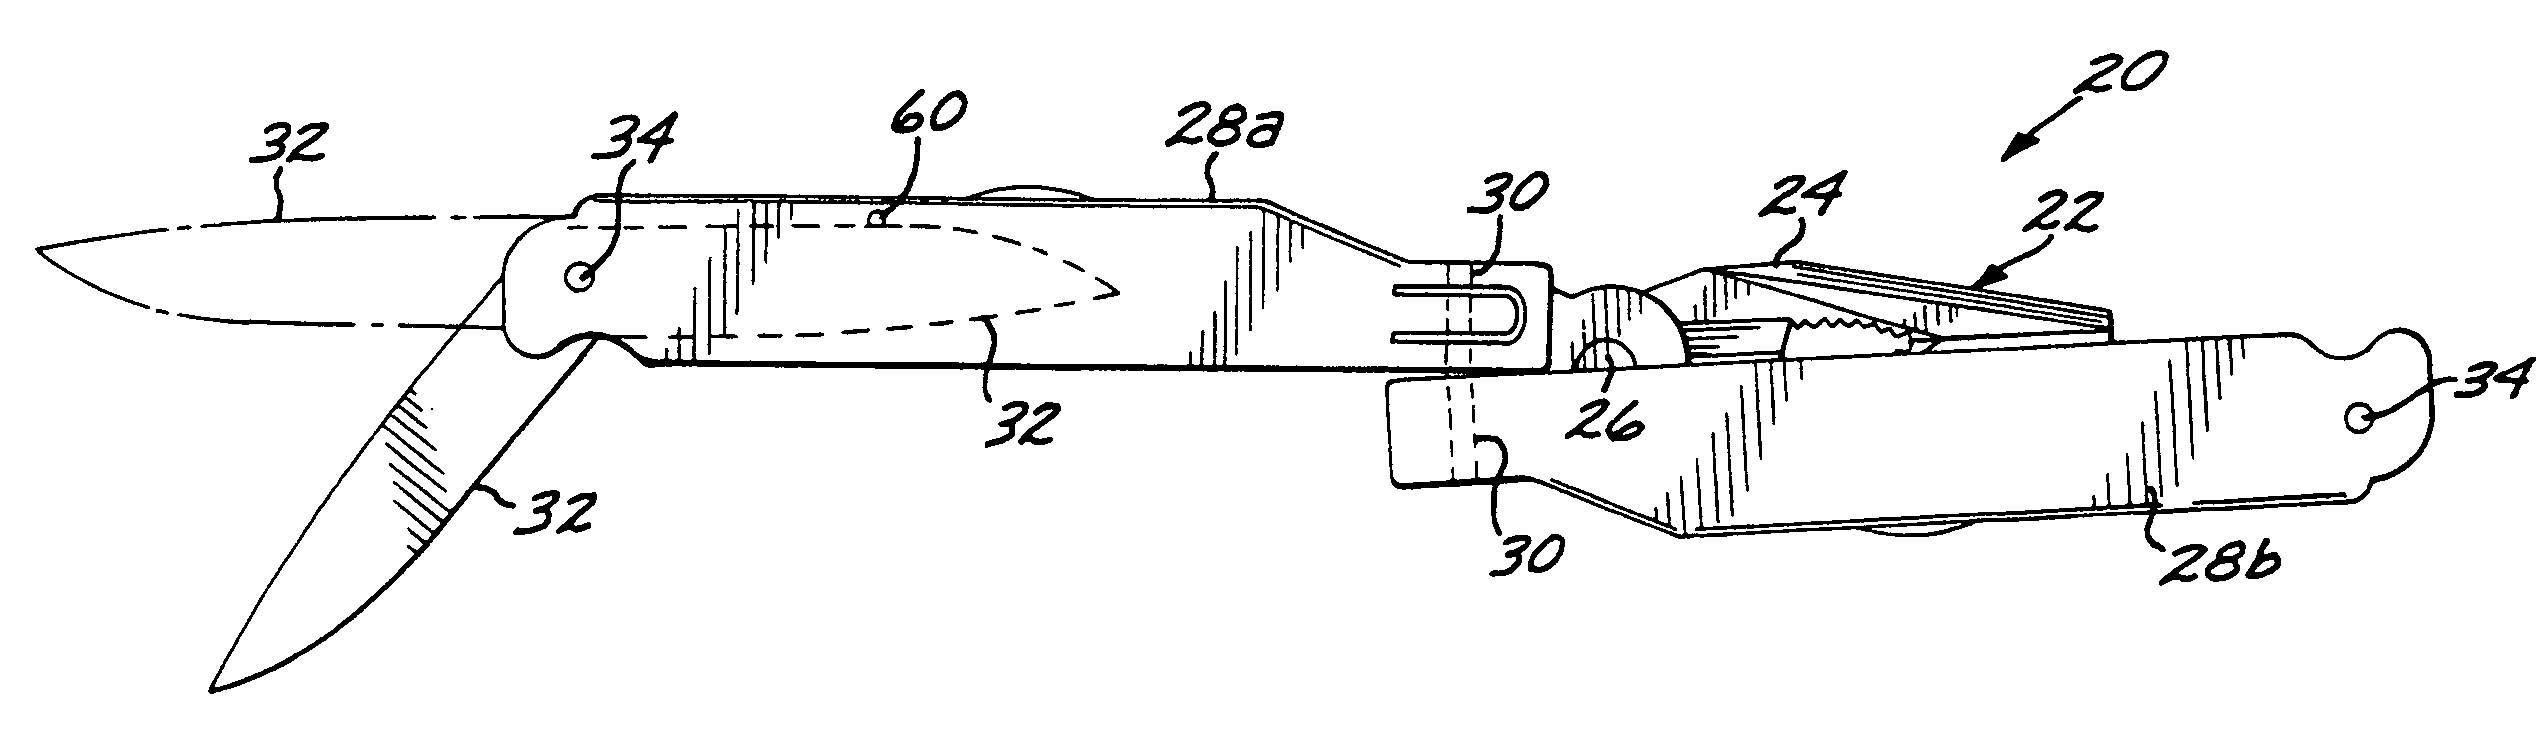 Hand tool with multiple locking blades controlled by a single locking mechanism and release